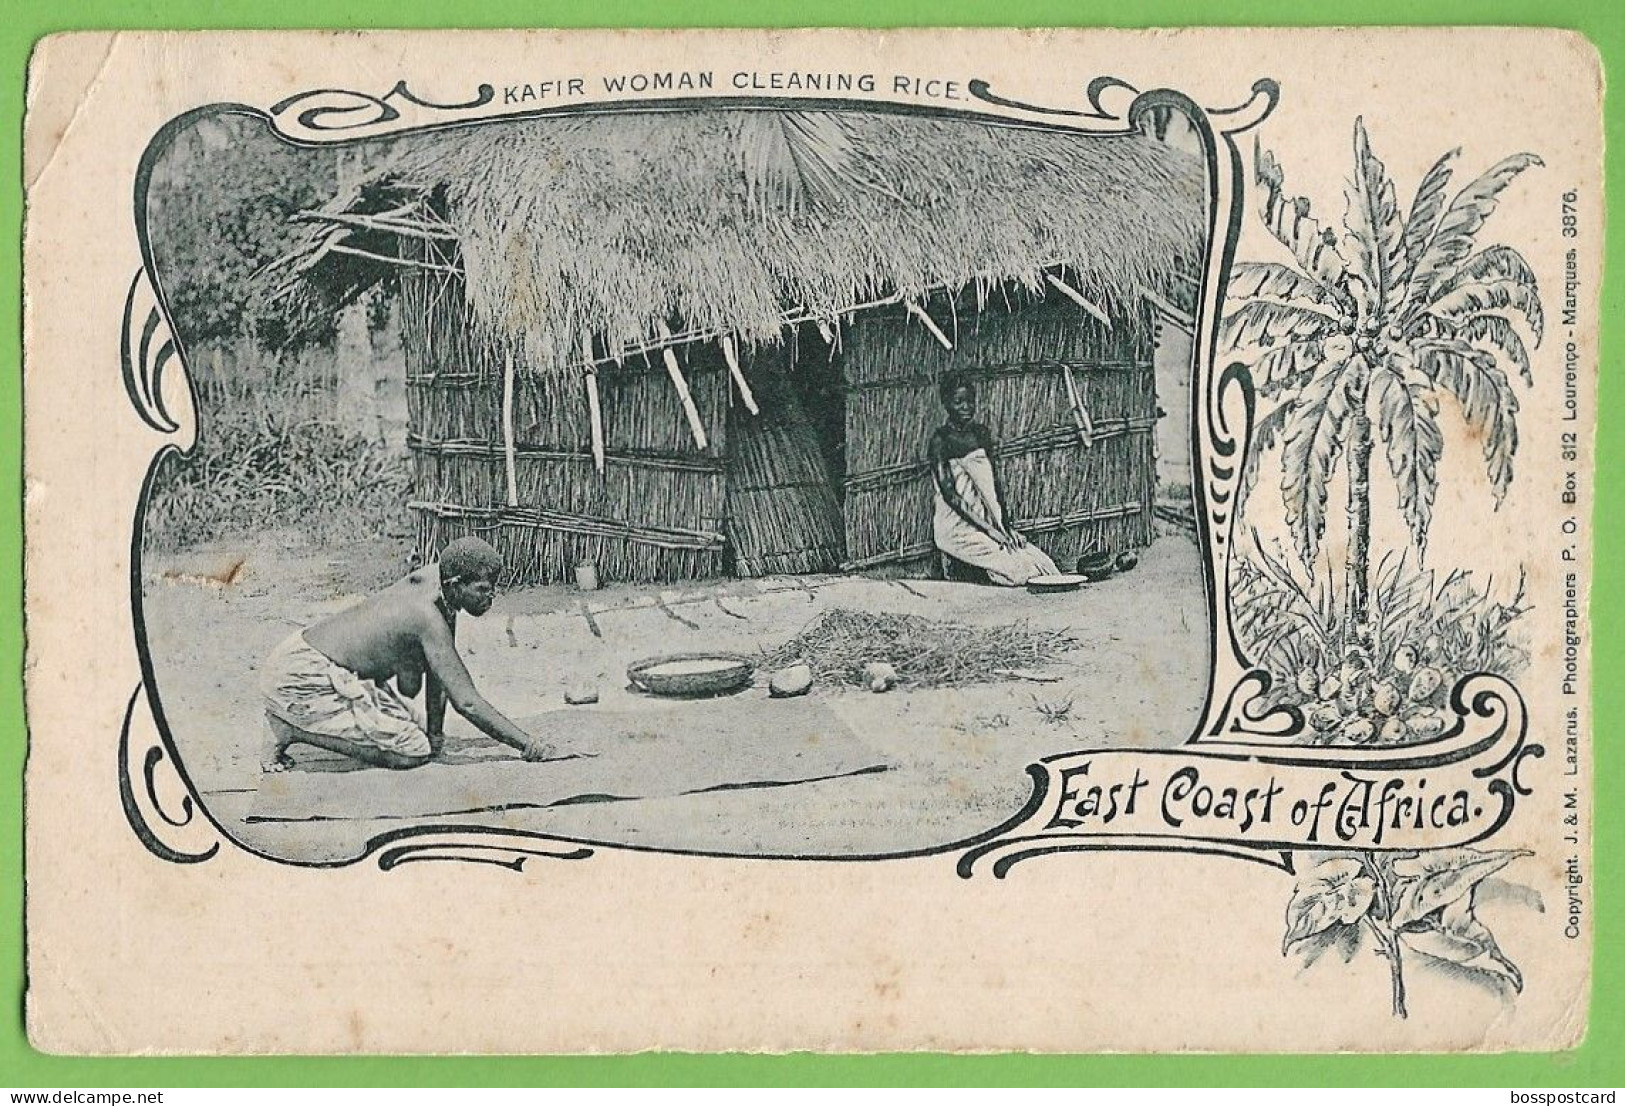 Moçambique - Kafir Woman Cleaning Rice - East Coast Africa - Nu - Nude - Ethnic - Ethnique - Portugal - Mosambik